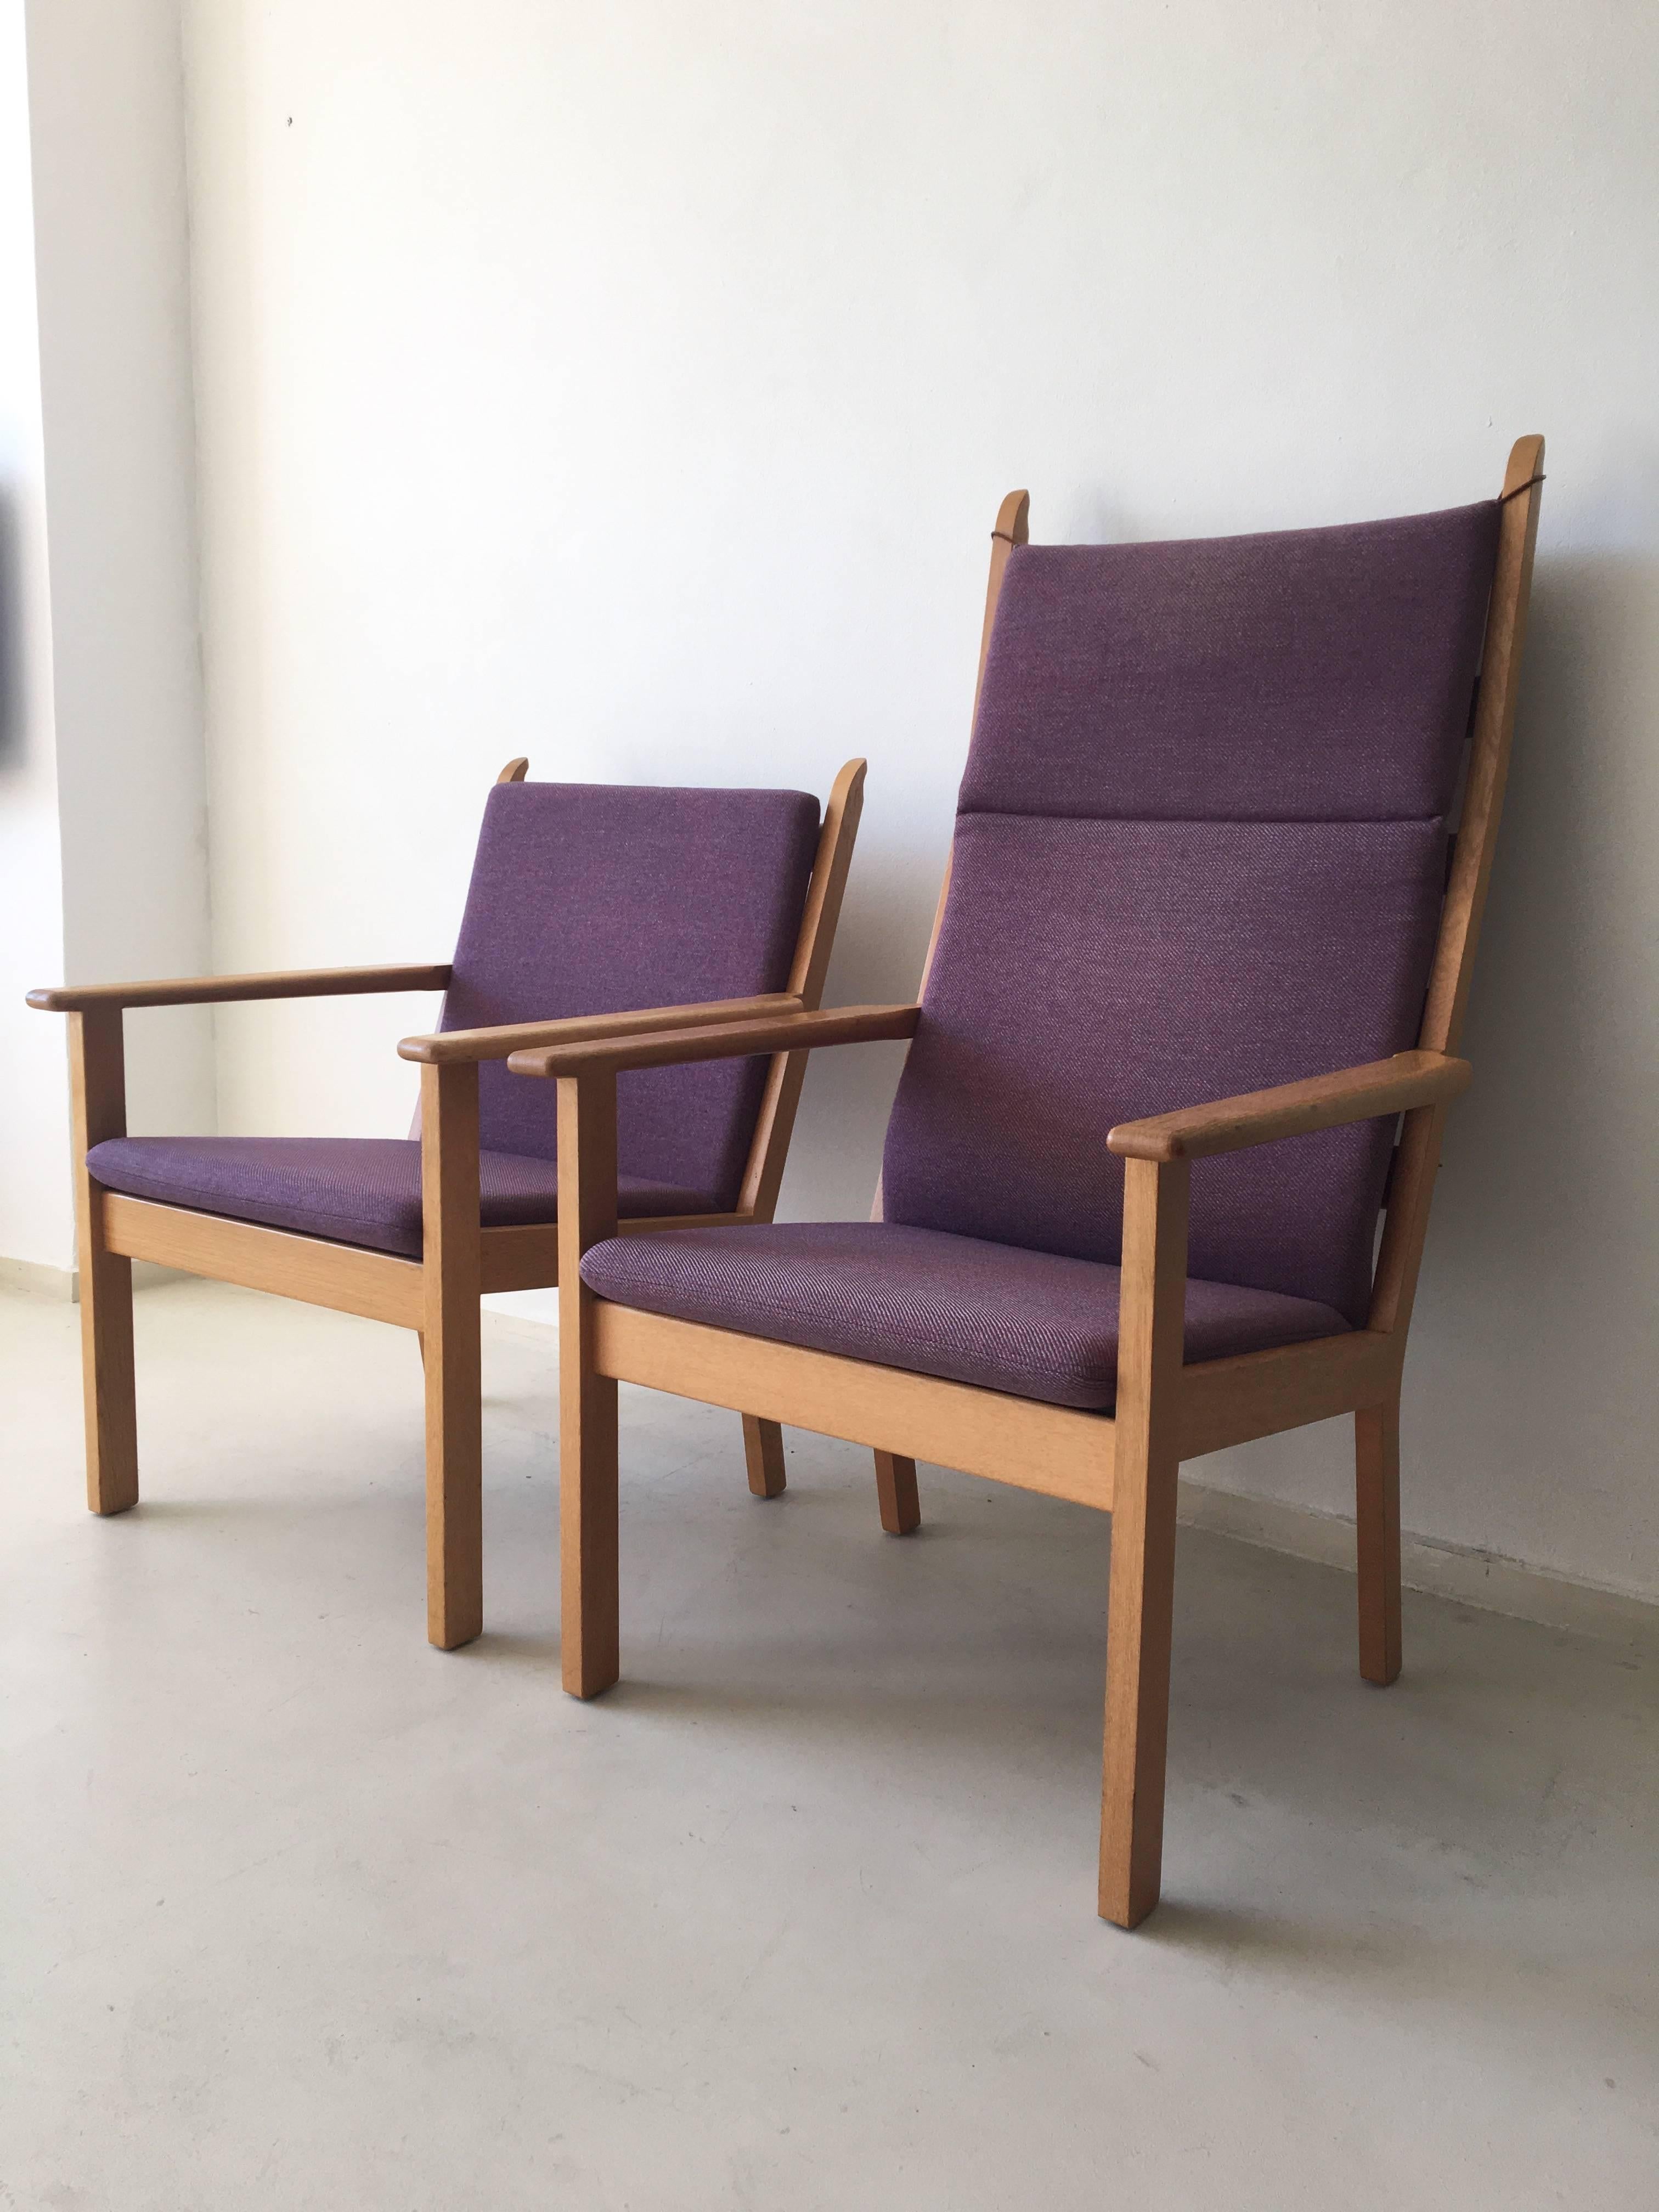 Rare set of chairs, consisting of an easy and a lounge chair, designed by Hans Wegner for GETAMA in 1984. They were produced, circa 1990s.

This set features a beautiful upholstery in pink/purple wool and a wonderful frame in oak.
The chairs are